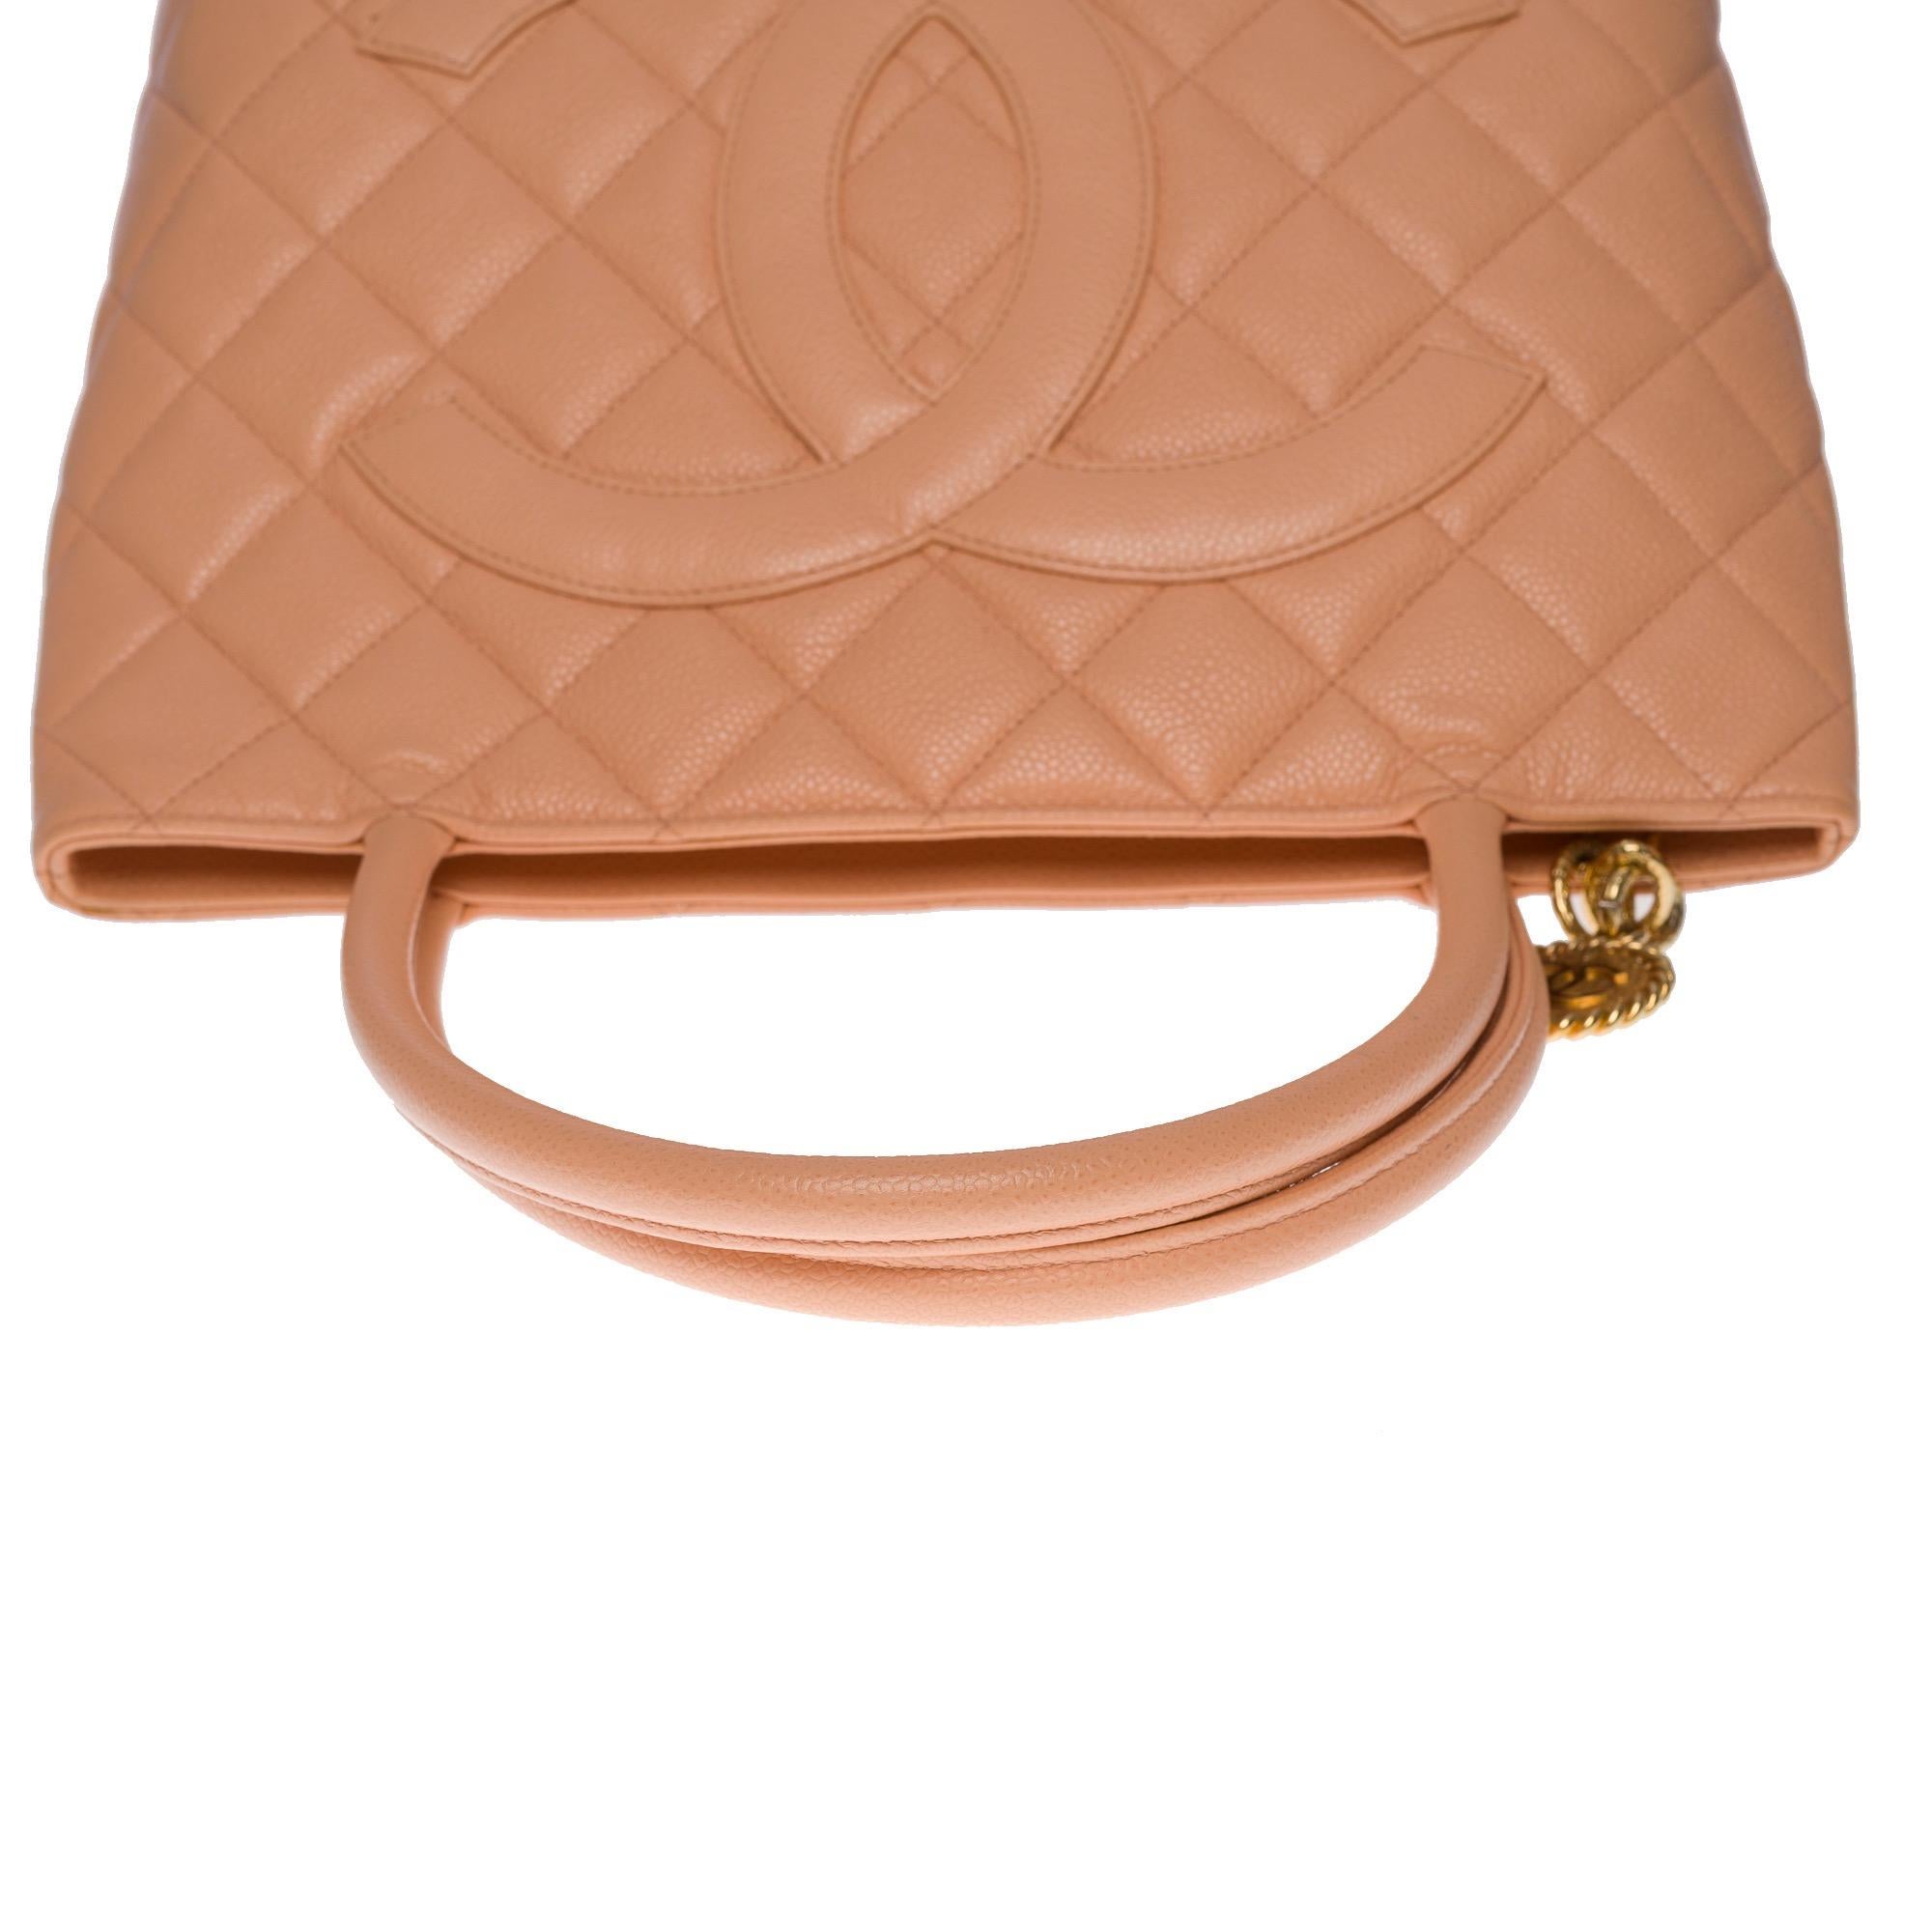 Beautiful Chanel Cabas Medallion bag in salmon caviar leather, GHW For Sale 4